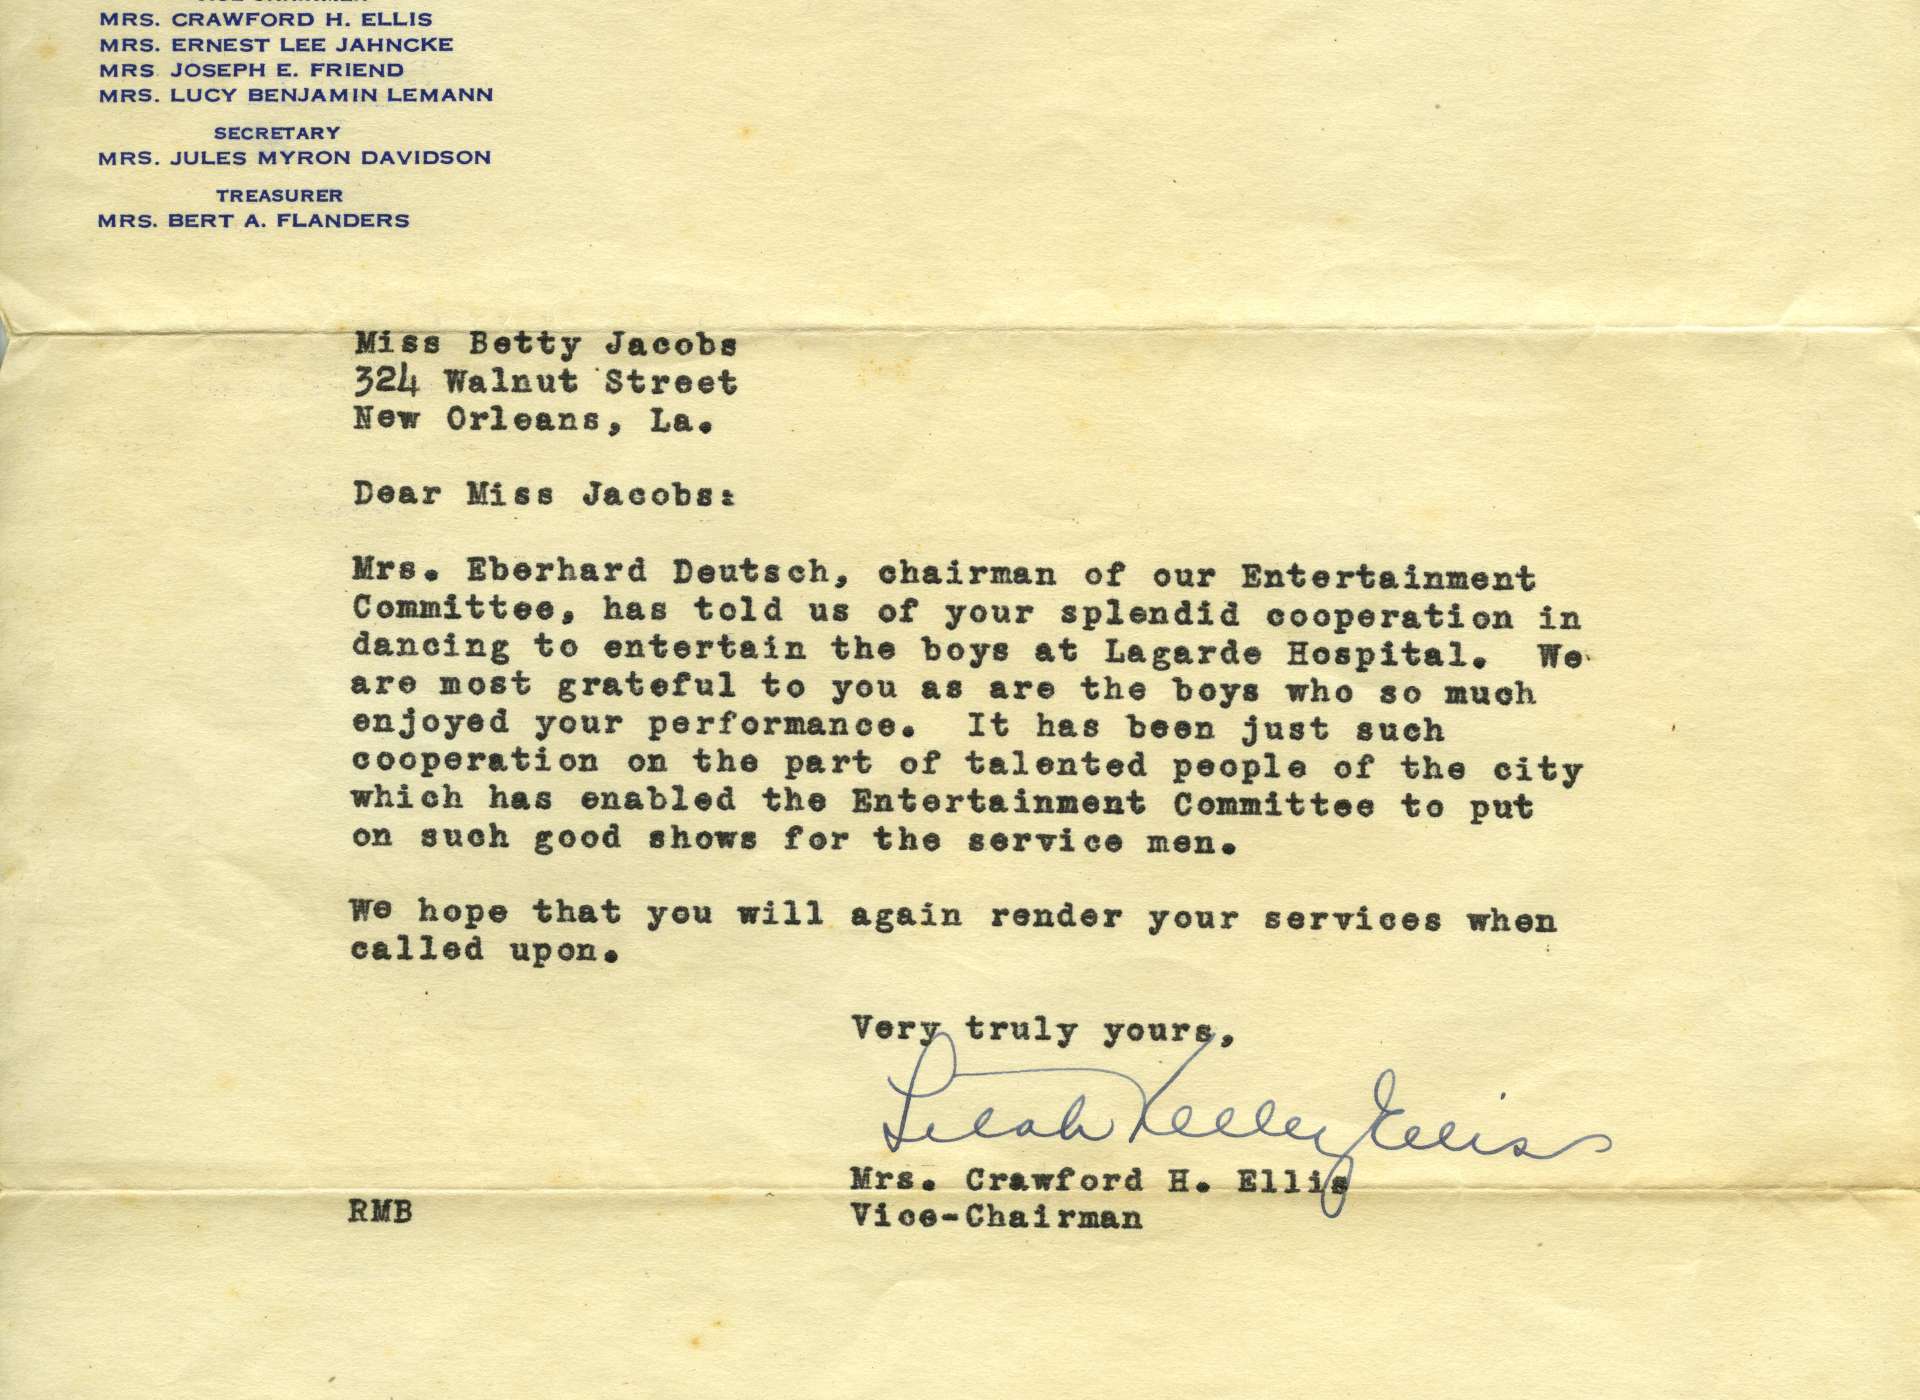 betty jacobs letter